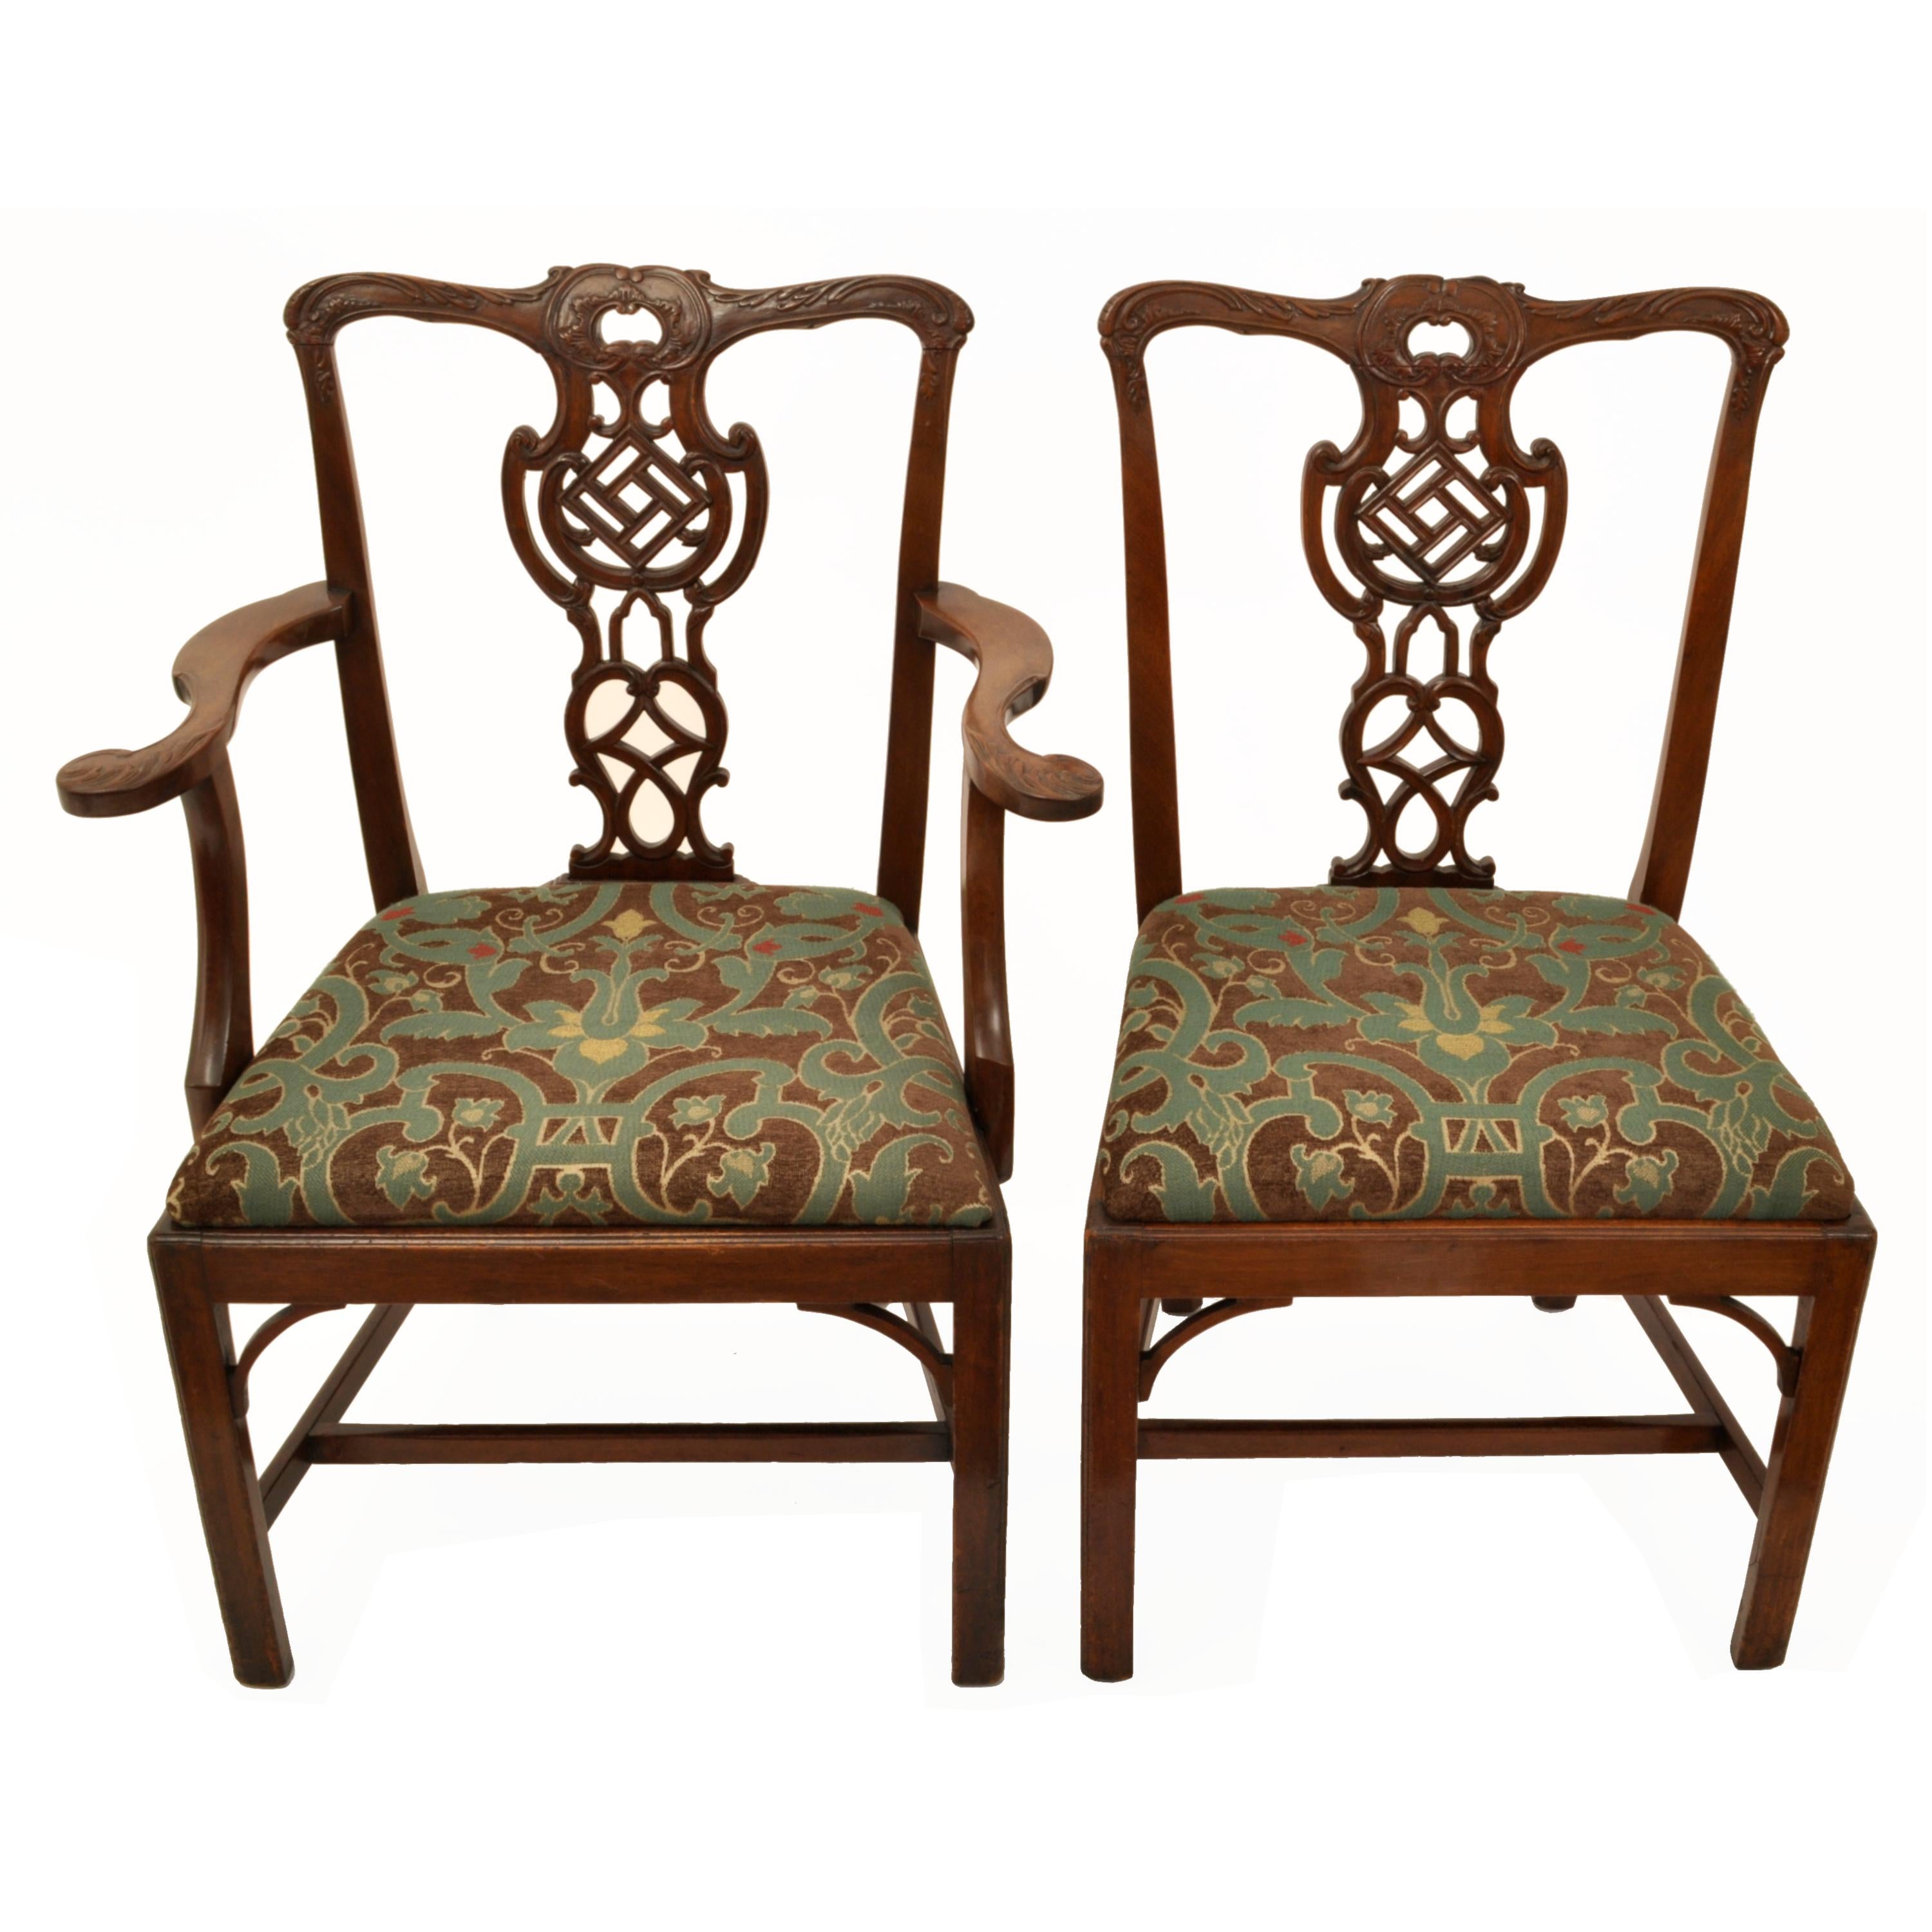 Antique 19th Century Set of Four Carved Mahogany Chippendale Dining Chairs 1890 For Sale 1